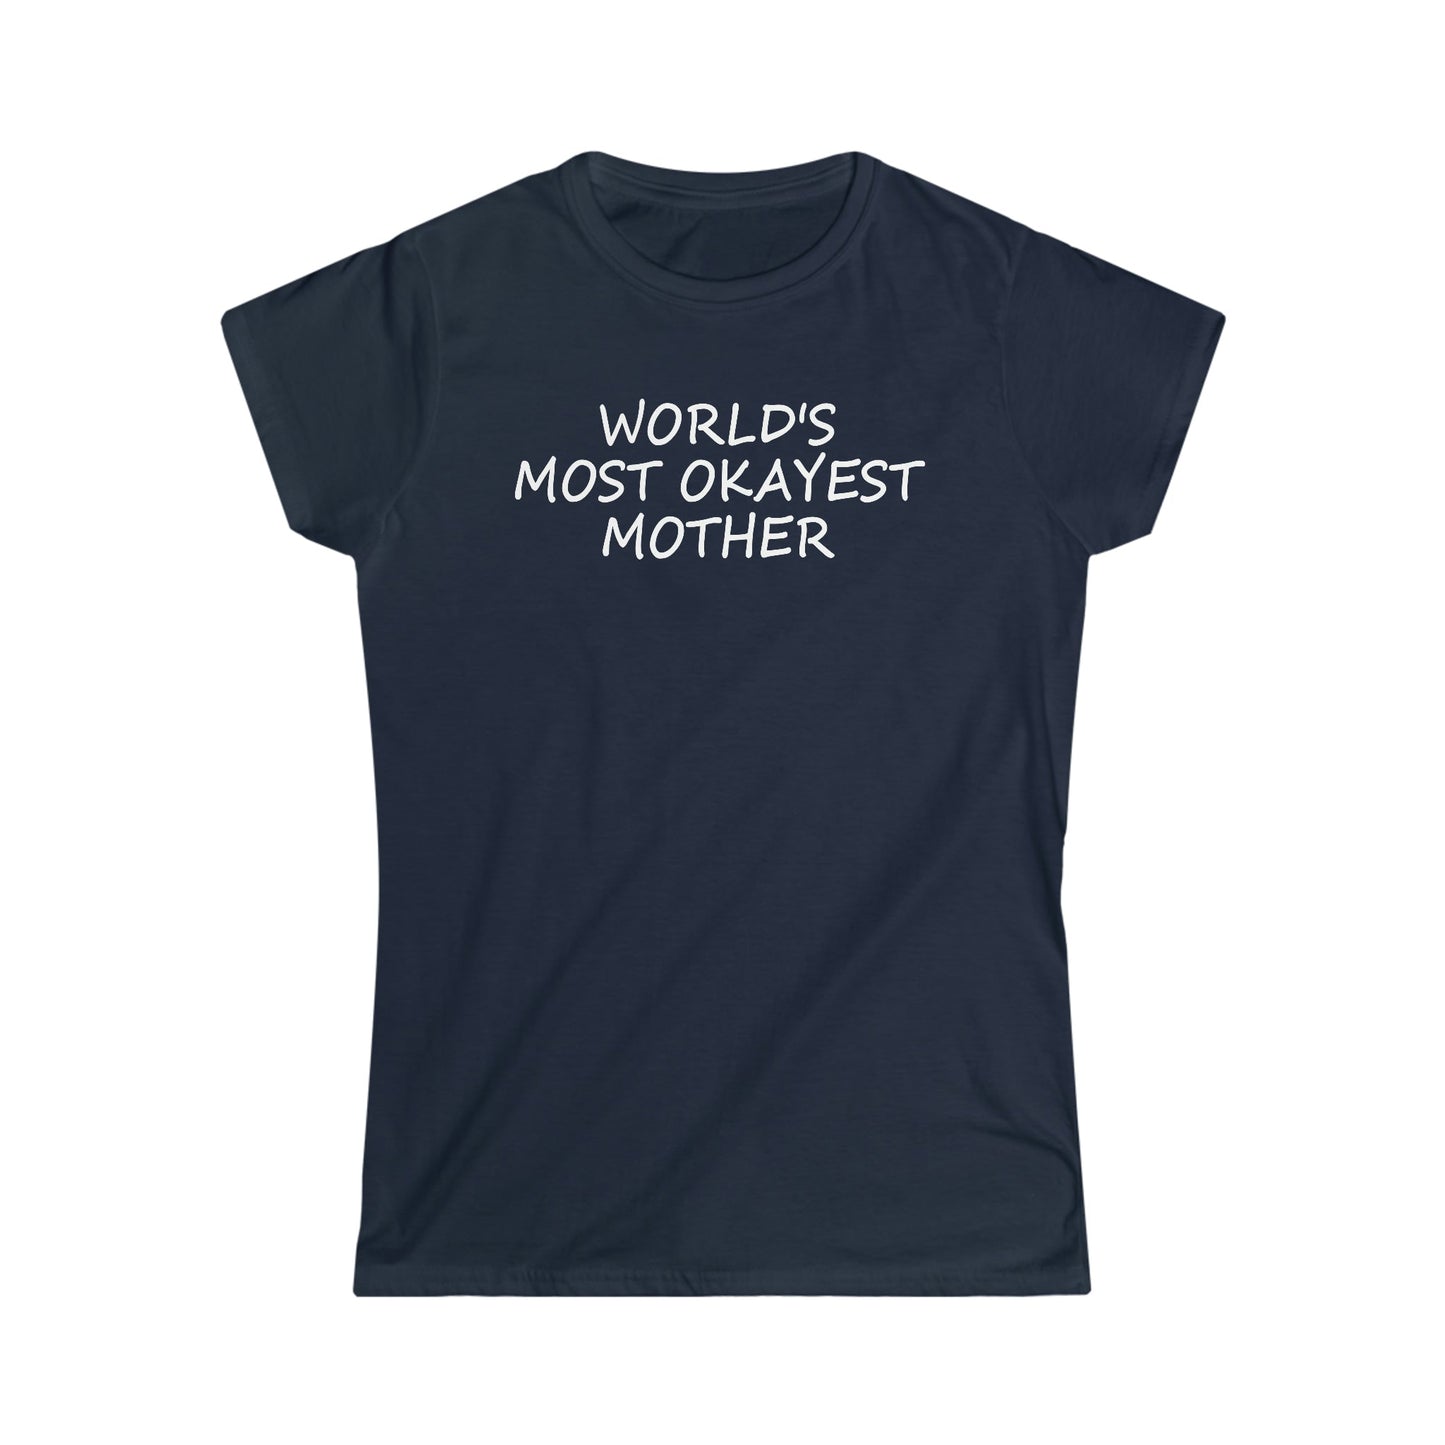 CrazyYetiClothing, CYC, World's Most Okayest Mother - Women's Softstyle Tee, T-Shirt